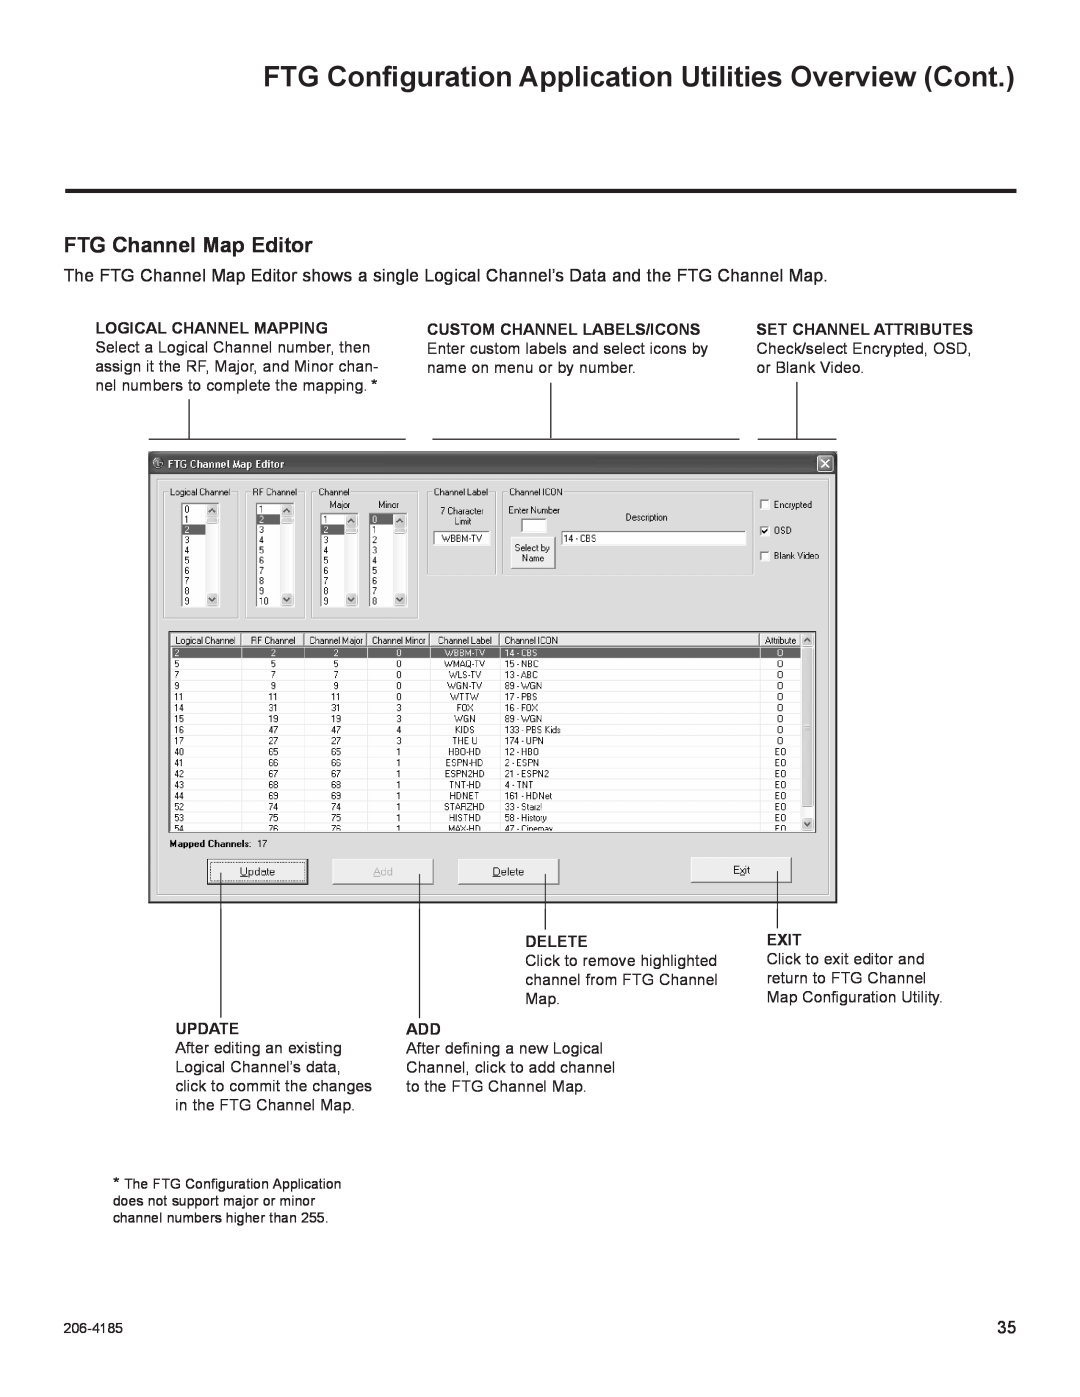 LG Electronics 37LD330H, 32LD330H setup guide FTG Configuration Application Utilities Overview Cont, FTG Channel Map Editor 